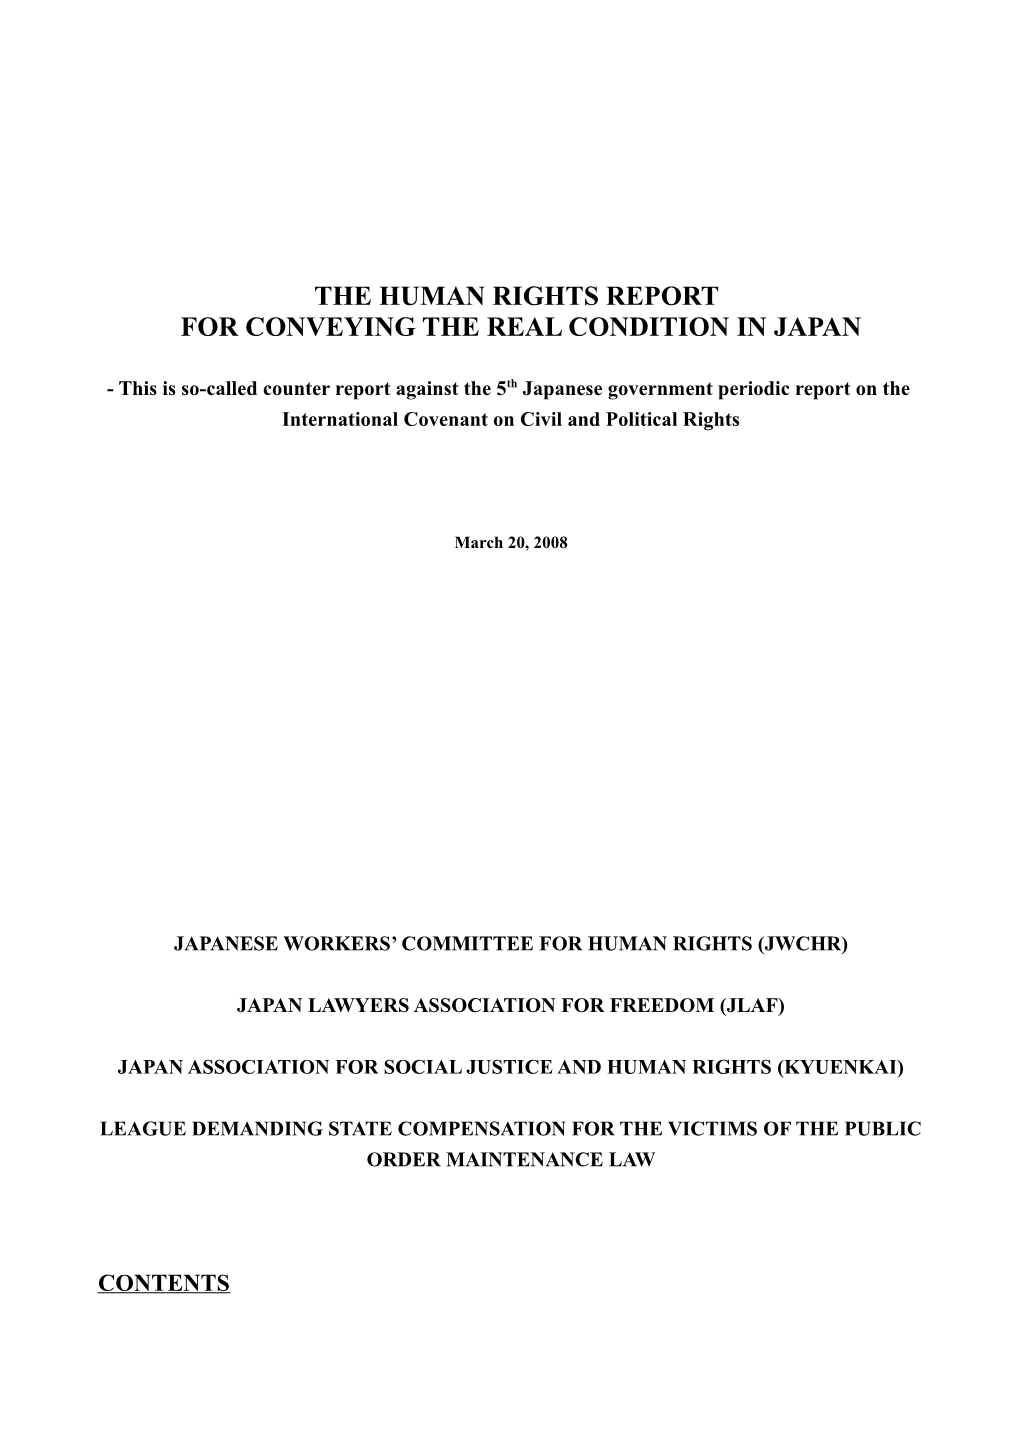 This Is So-Called Counter Report Against the 5Th Japanese Government Periodic Report on The